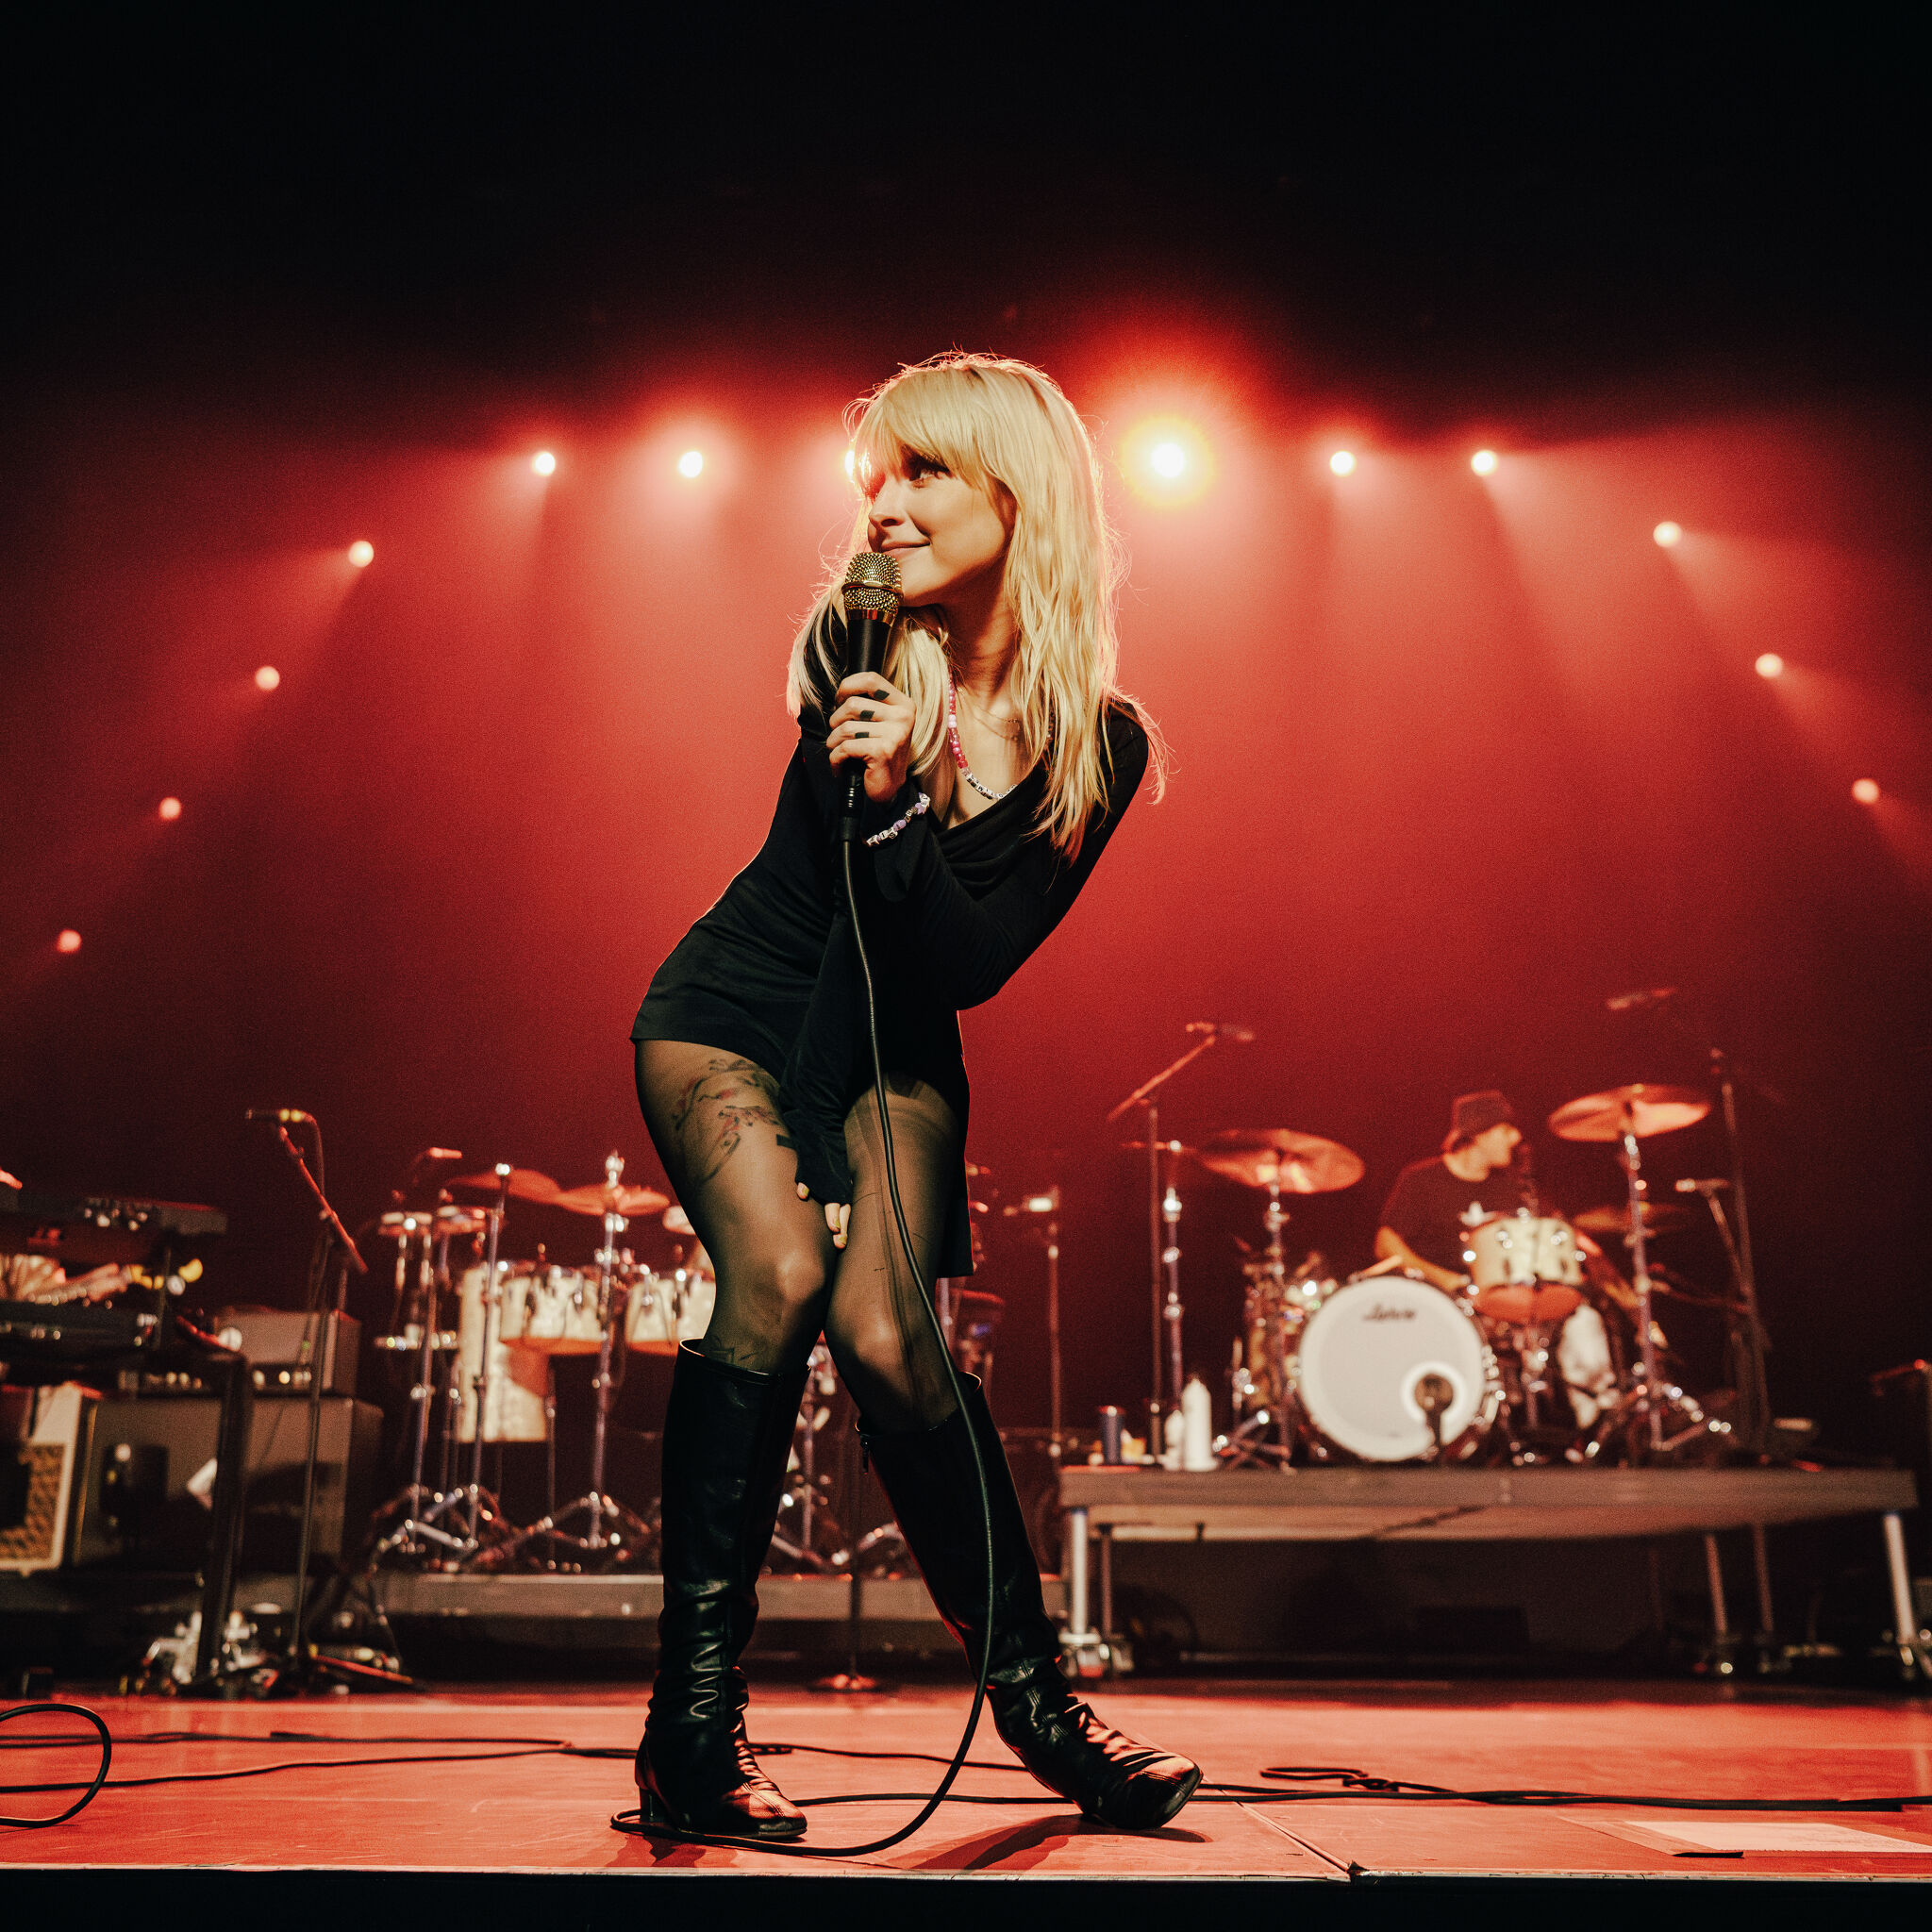 Paramore concert recap: 7 takeaways from Indianapolis